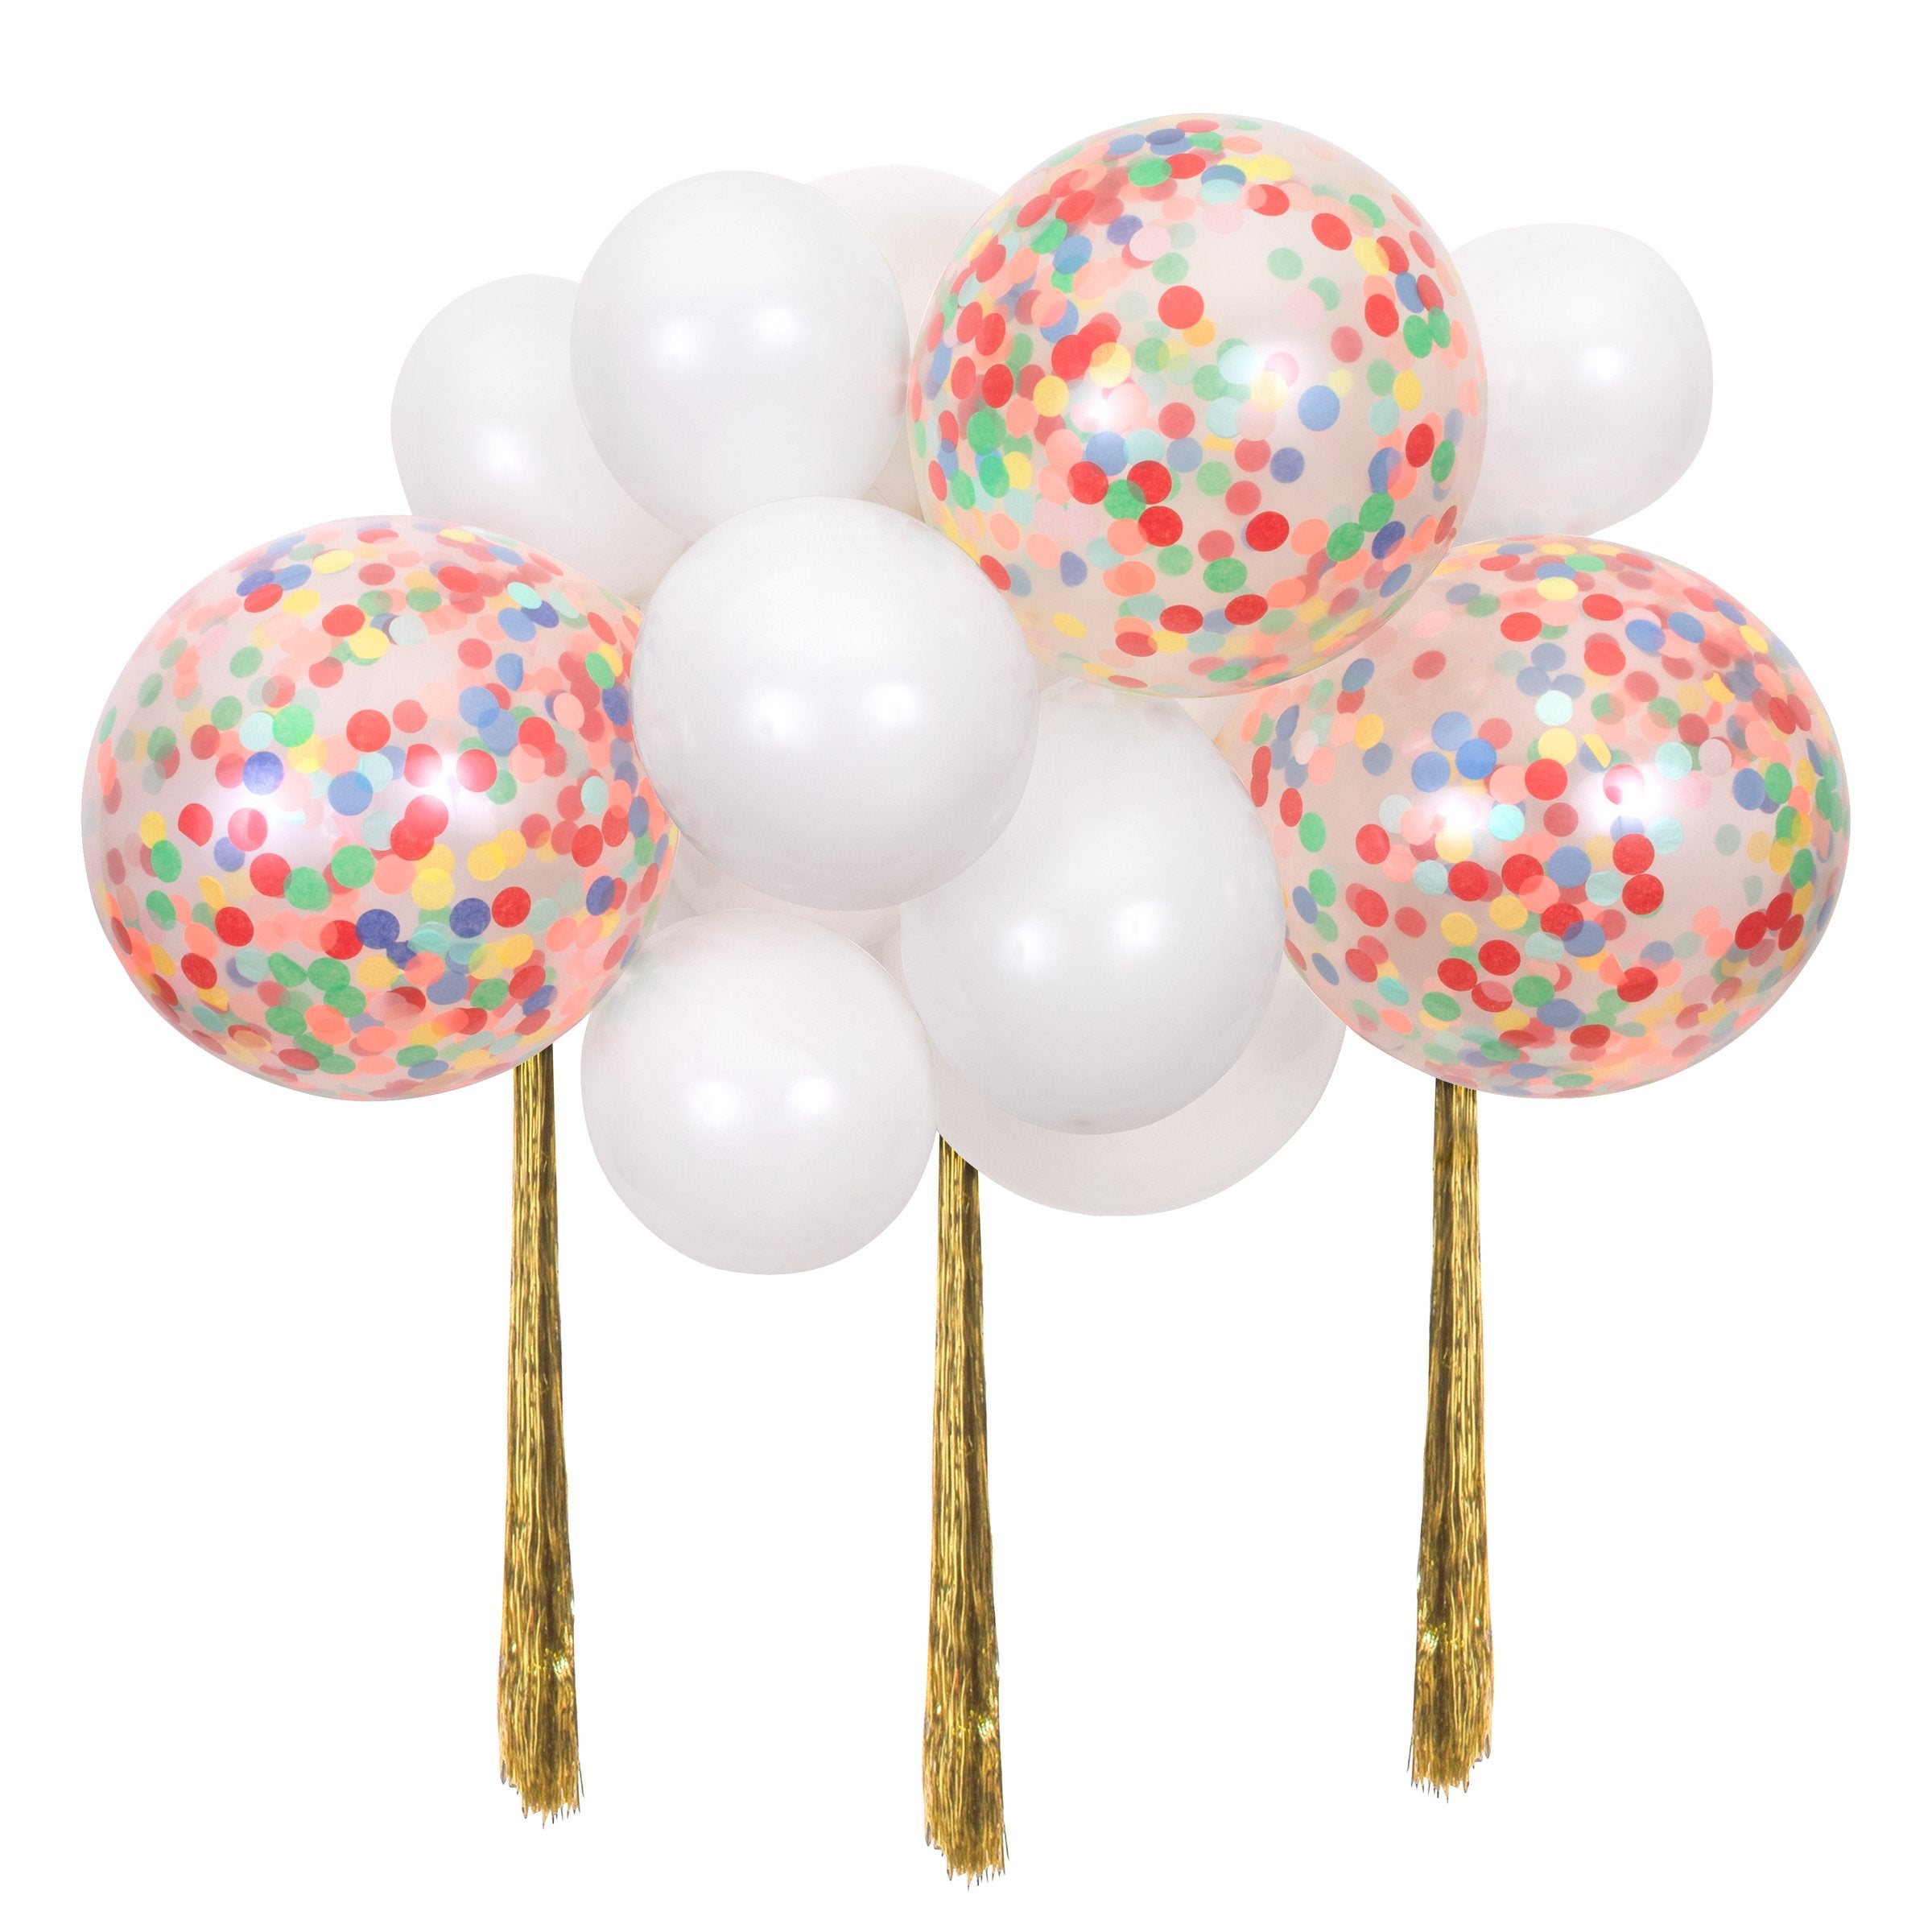 This wonderful balloon cloud kit has 14 balloons, 4 of which are pre-filled with confetti, and three gold streamers.